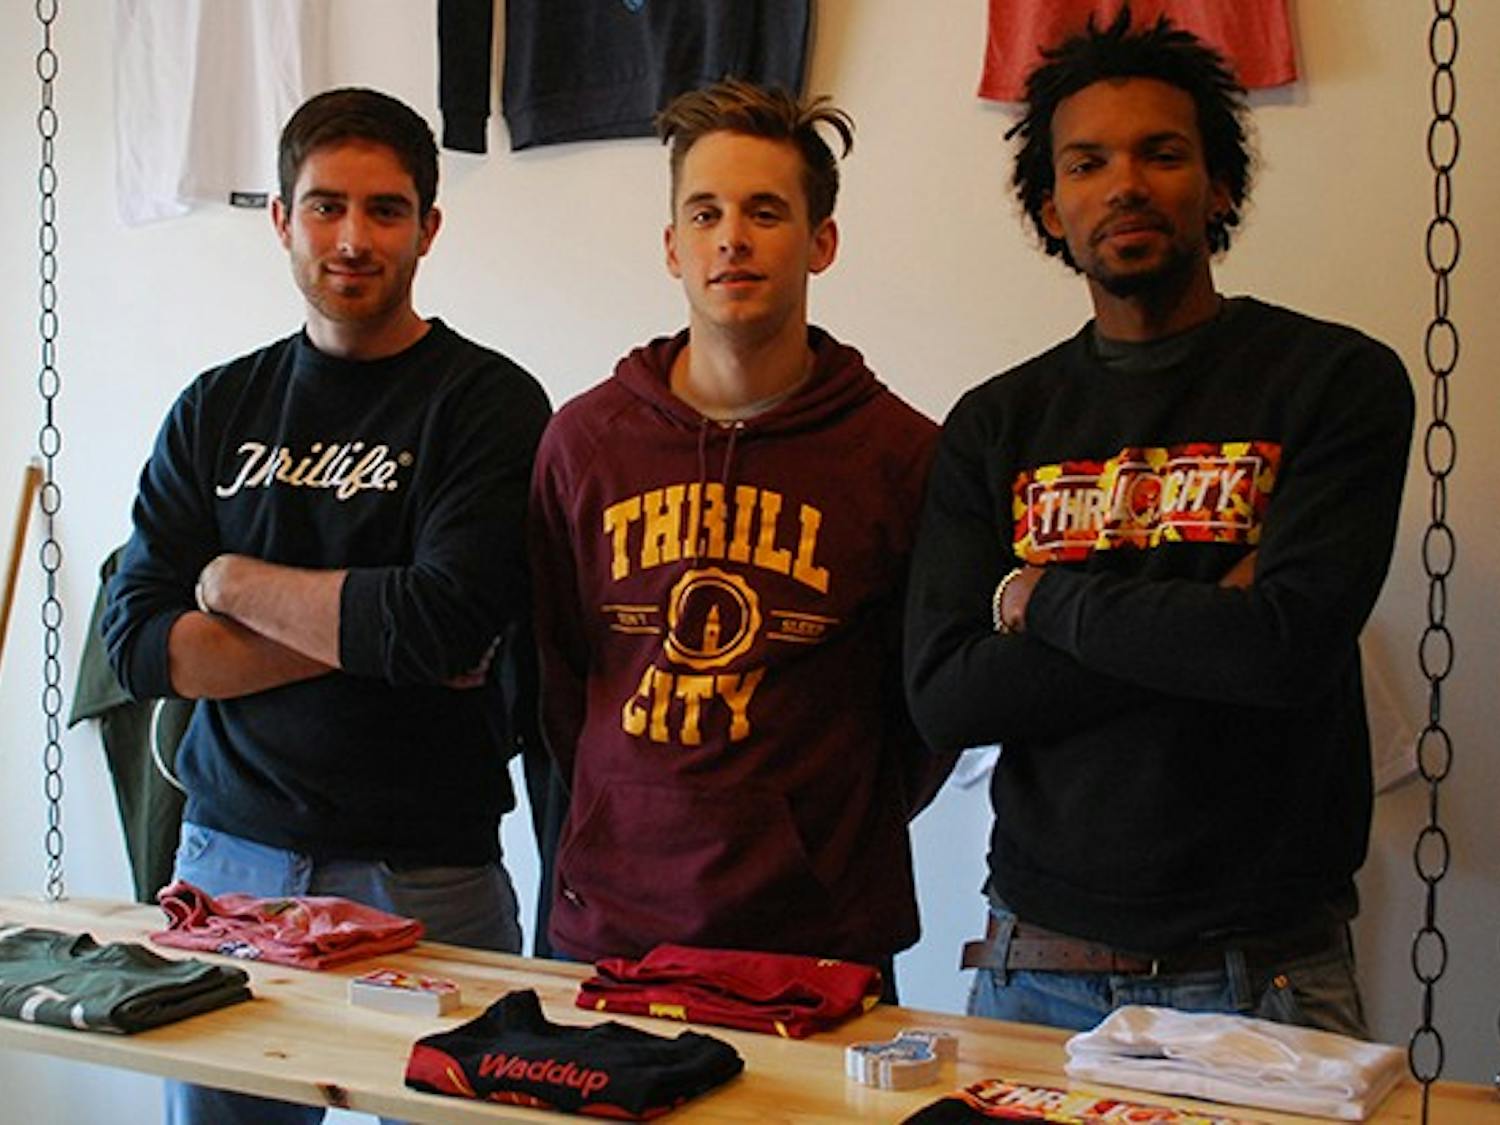 Some UNC students are opening a store for Thrill City, their brand that they have started. They'll sell their apparel and feature other brands in the area. 